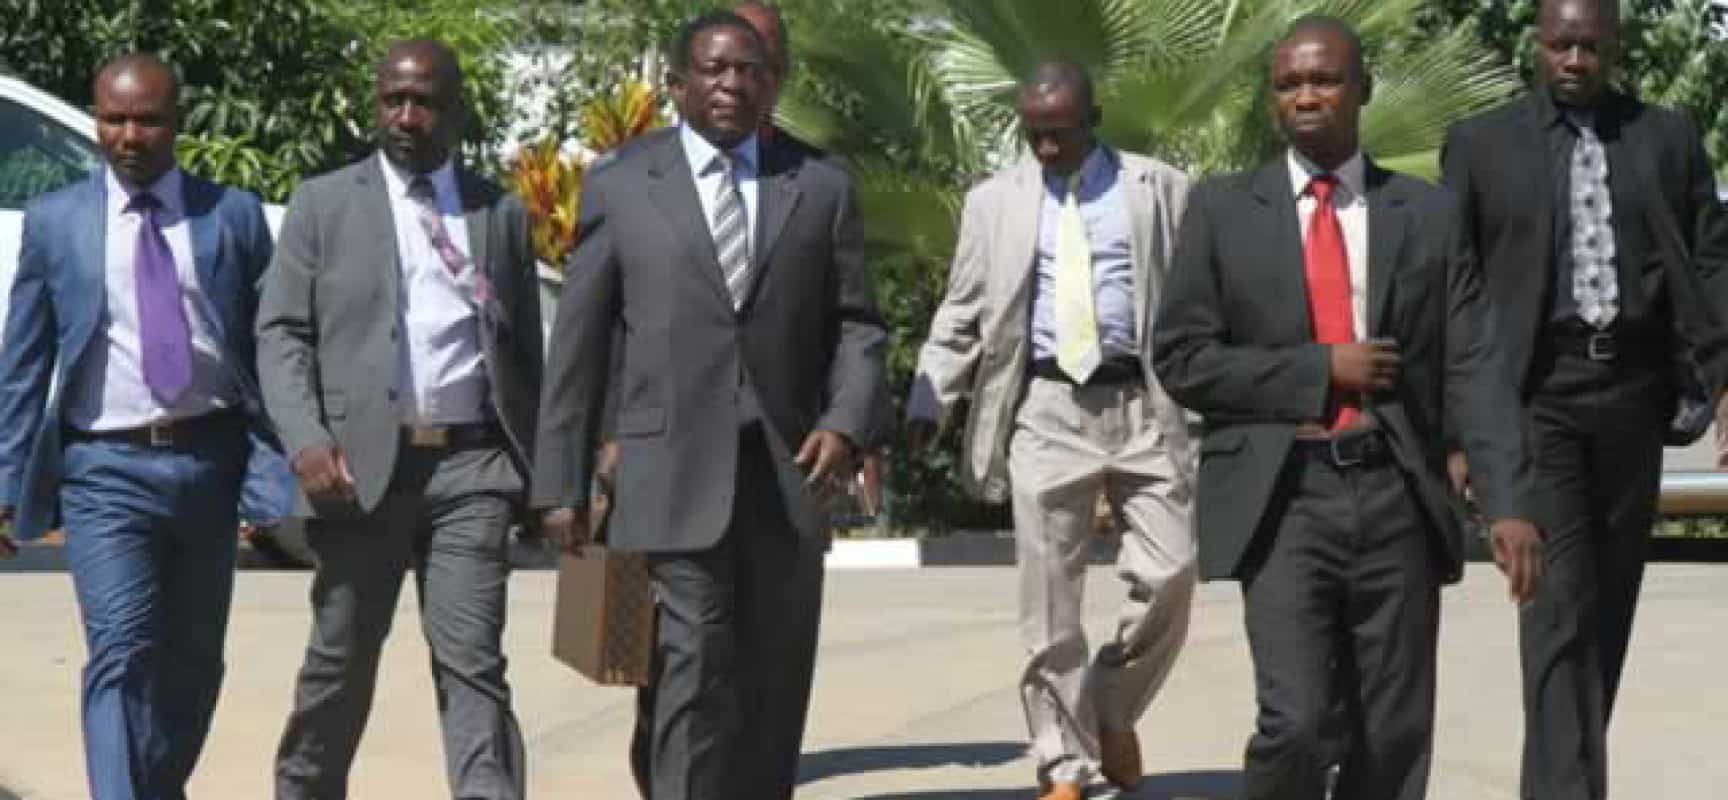 PICTURES: Mnangagwa’s top bodyguard wins mouth-watering Covid-19 supply tender